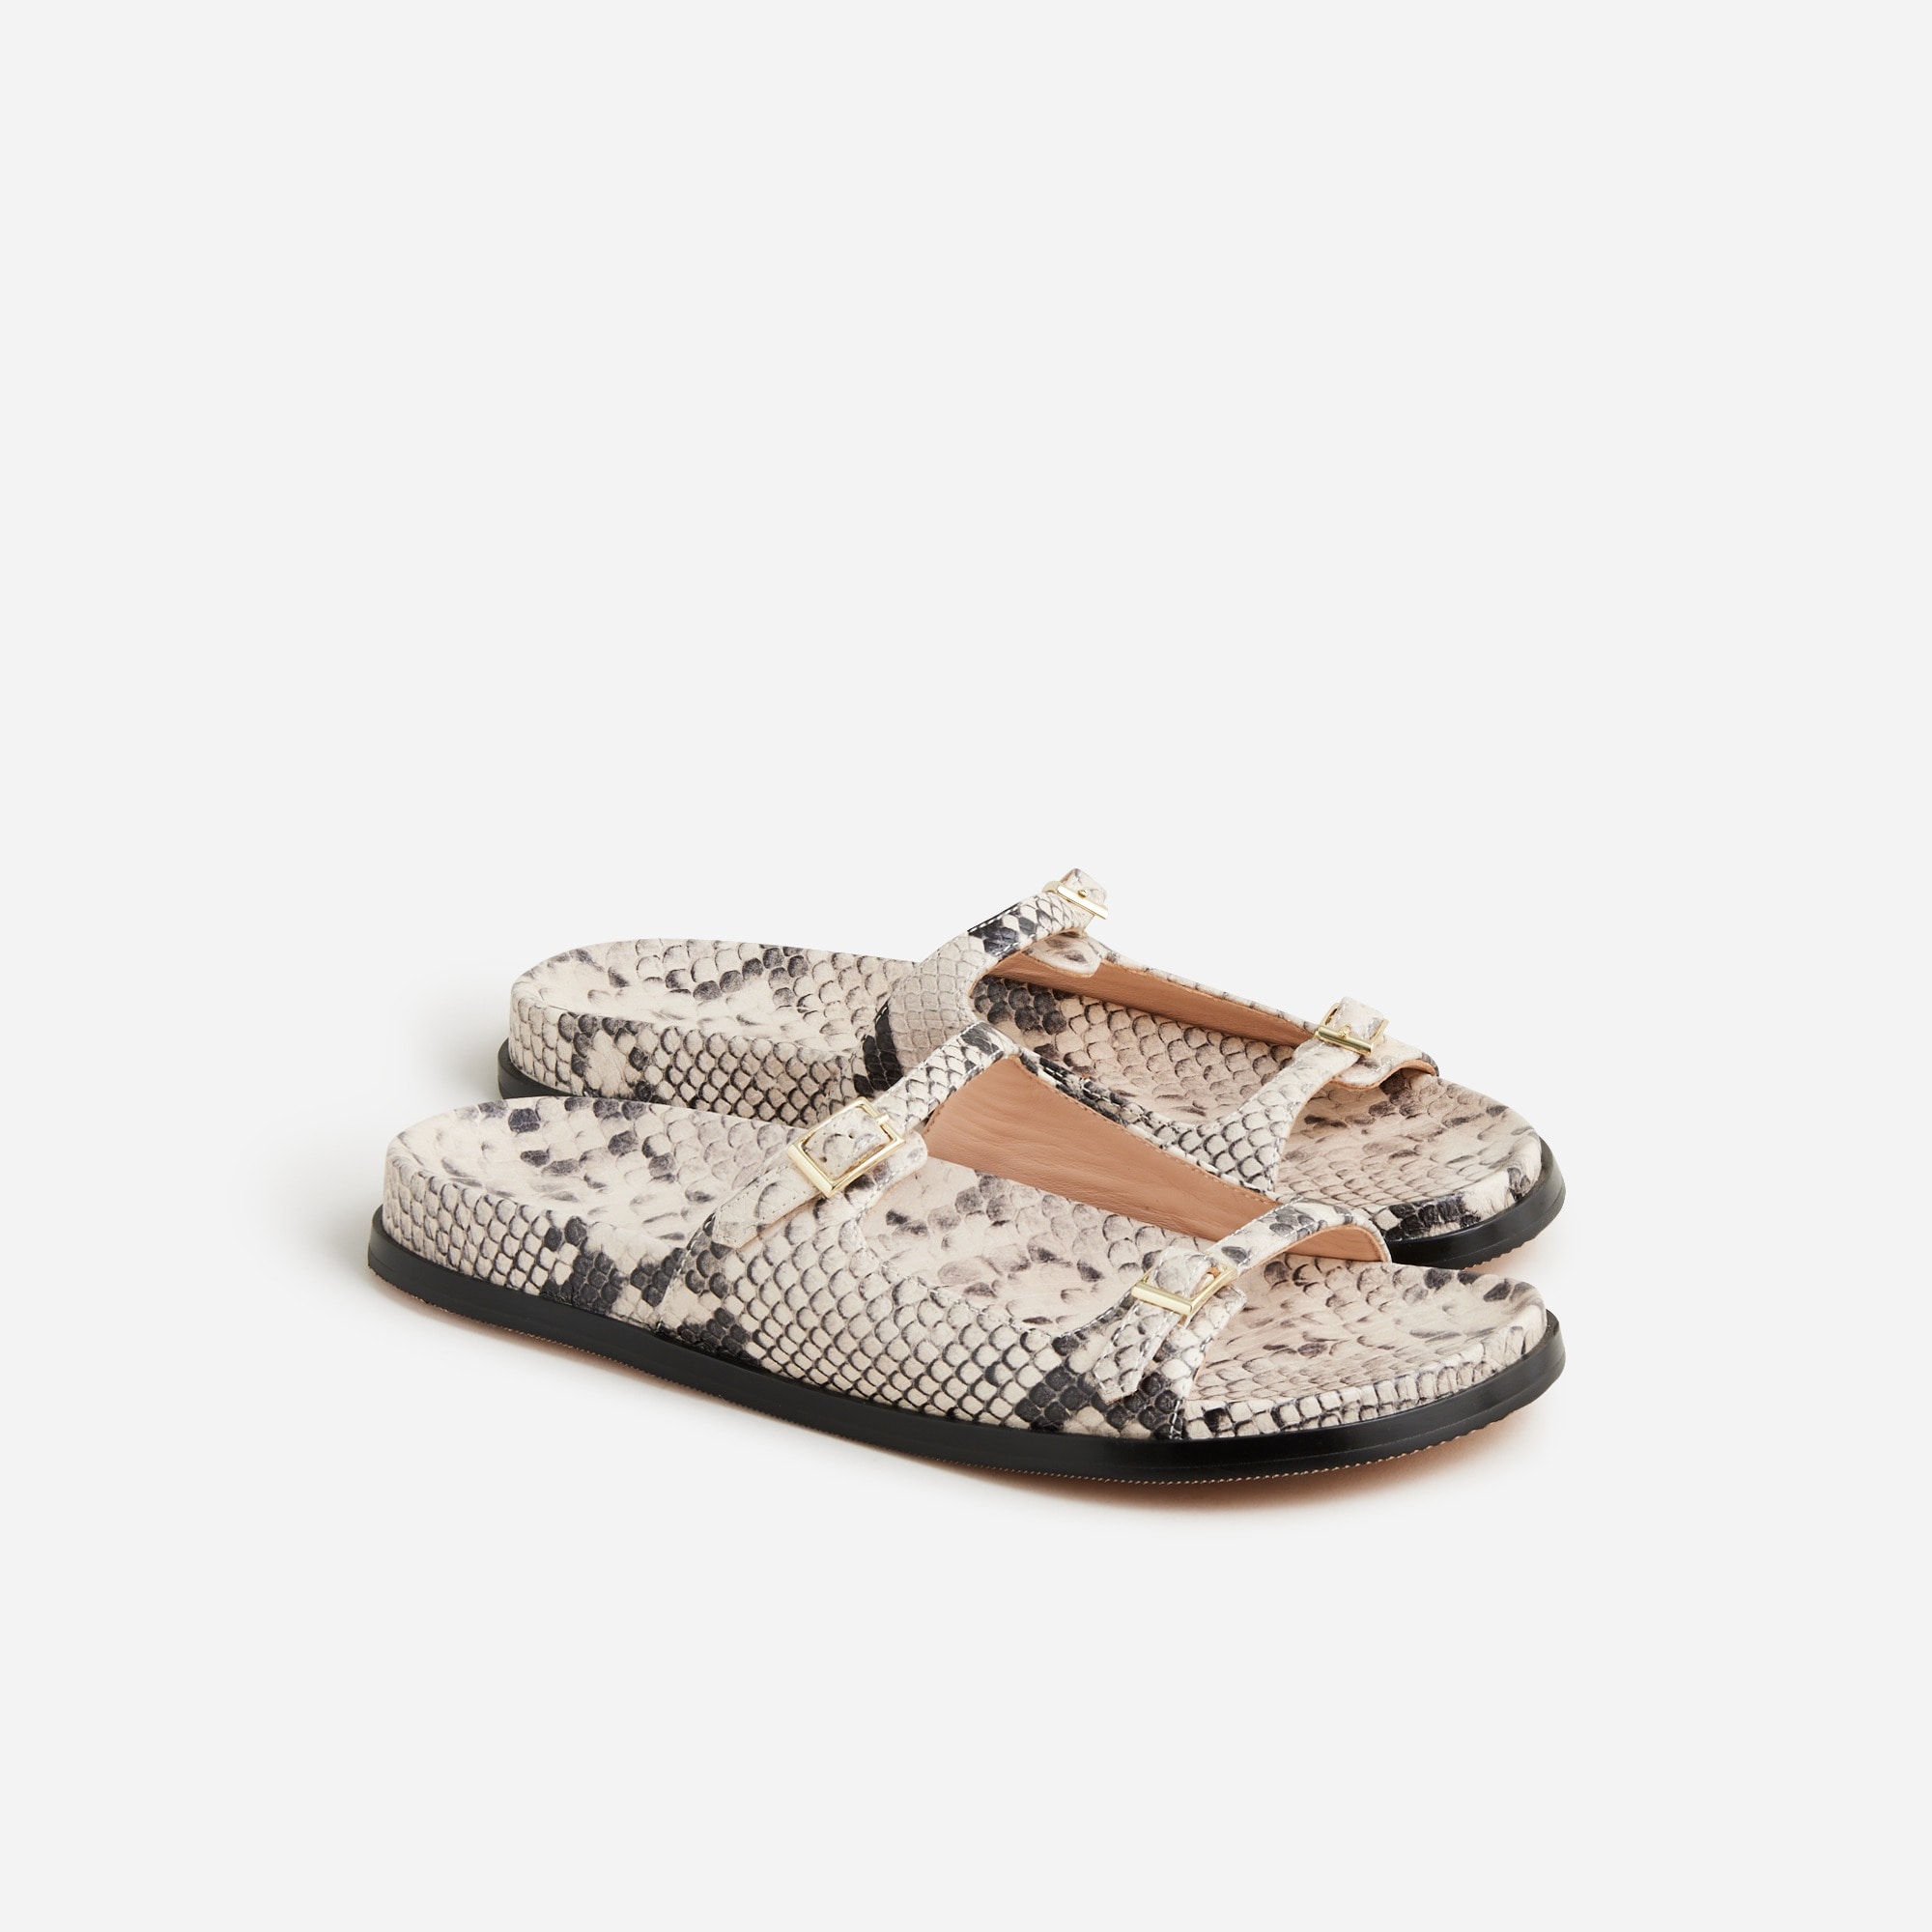 Jcrew Colbie buckle sandals in snake-embossed leather